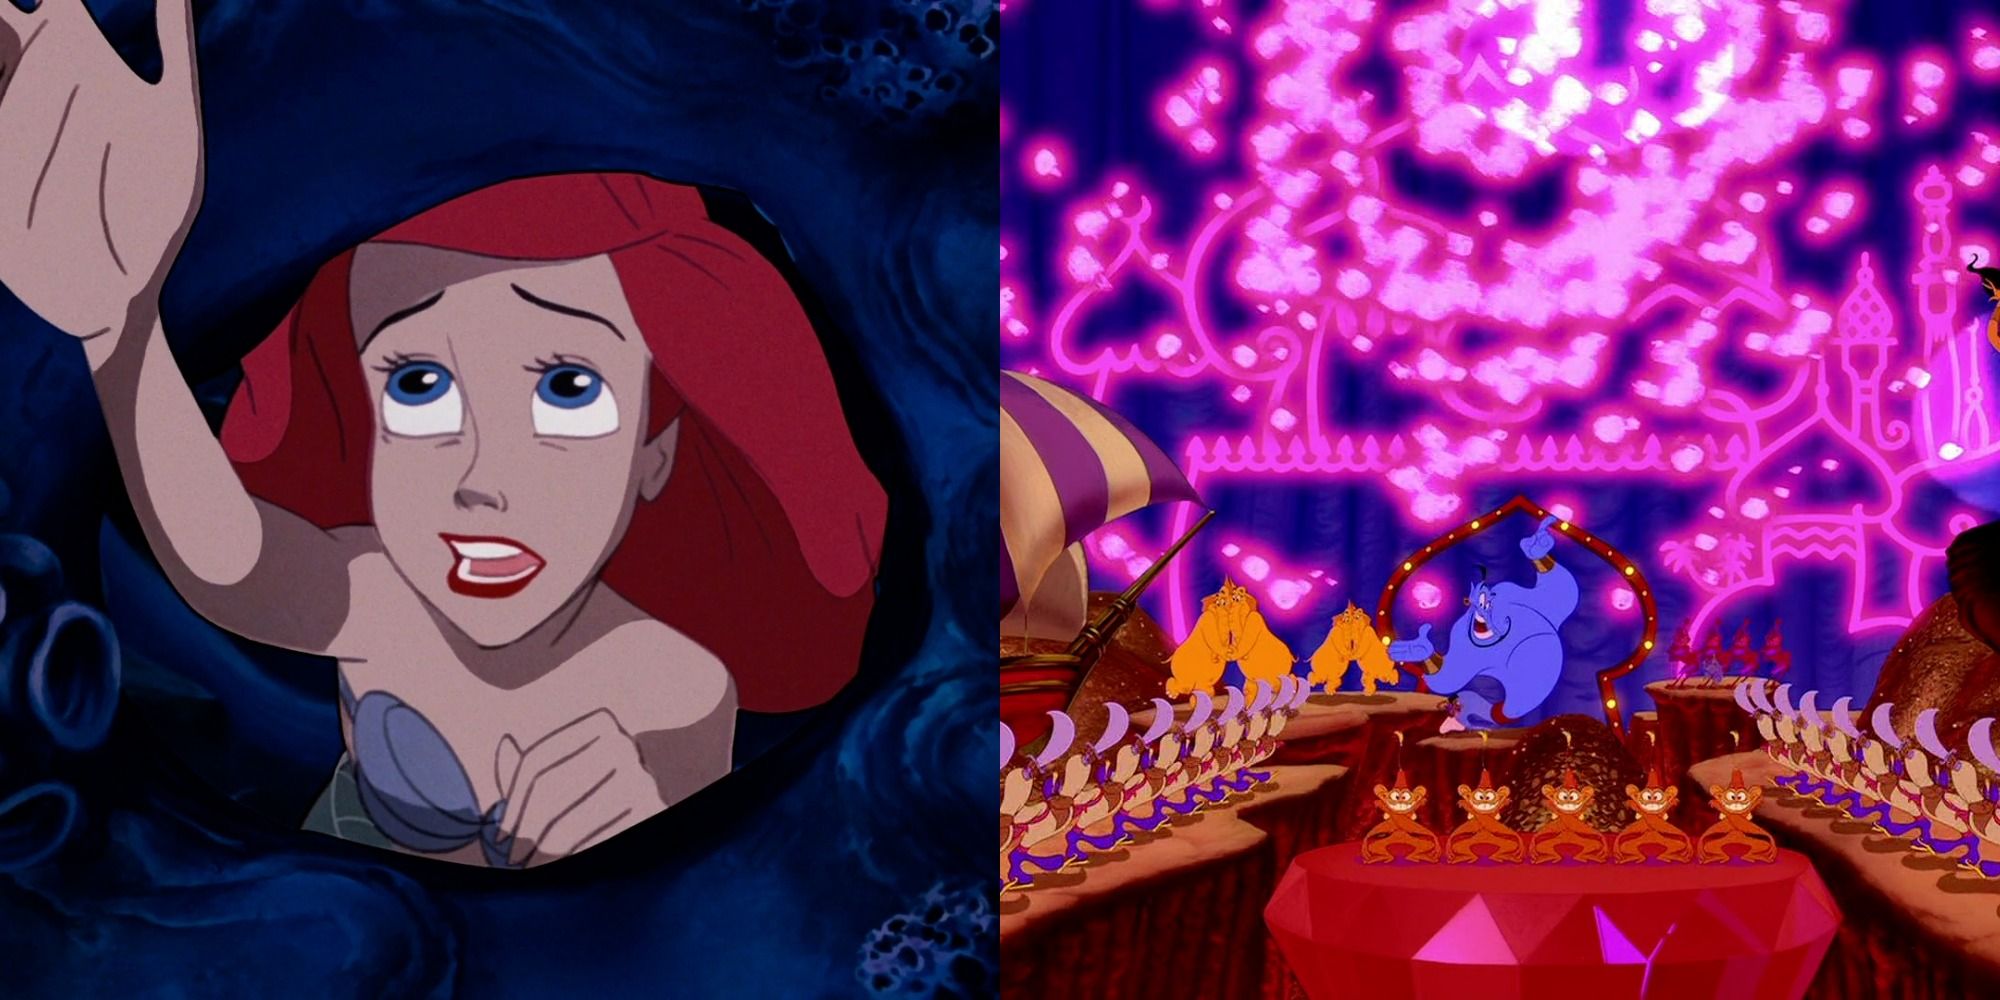 Split image showing Ariel in The Little Mermaid and Genie in Aladdin